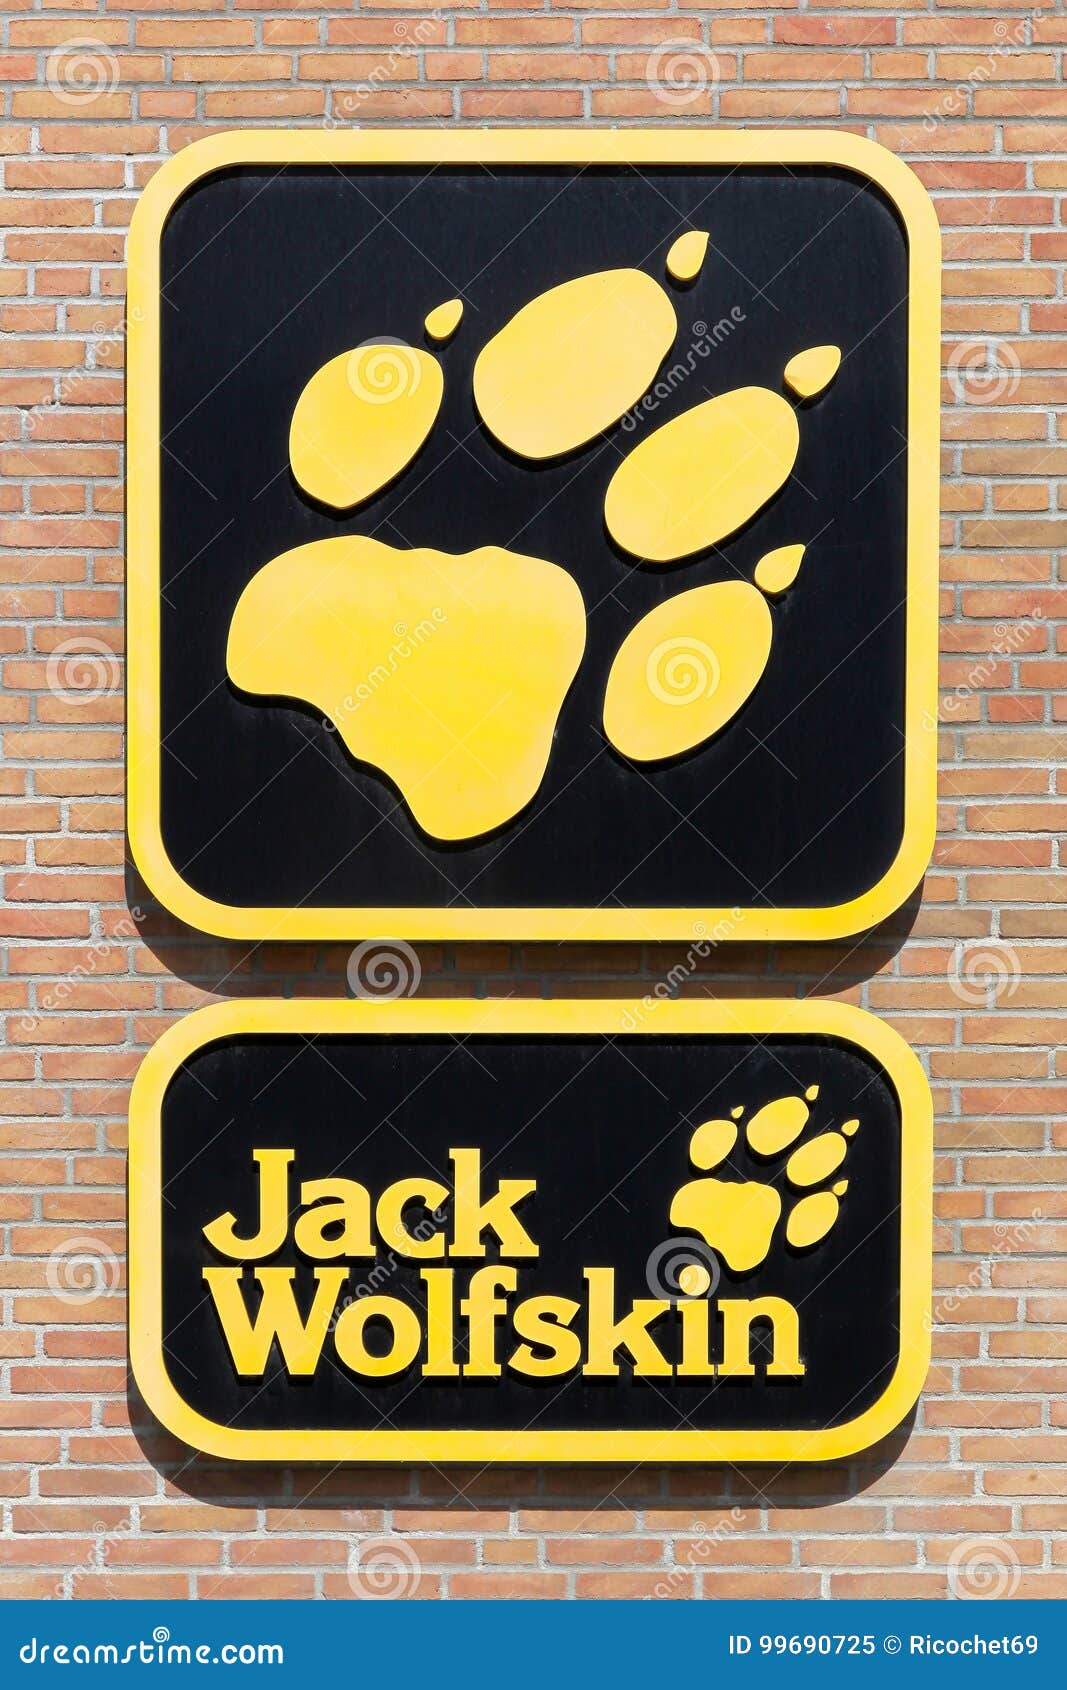 Jack on Wall Image - Image of tent, brand: 99690725